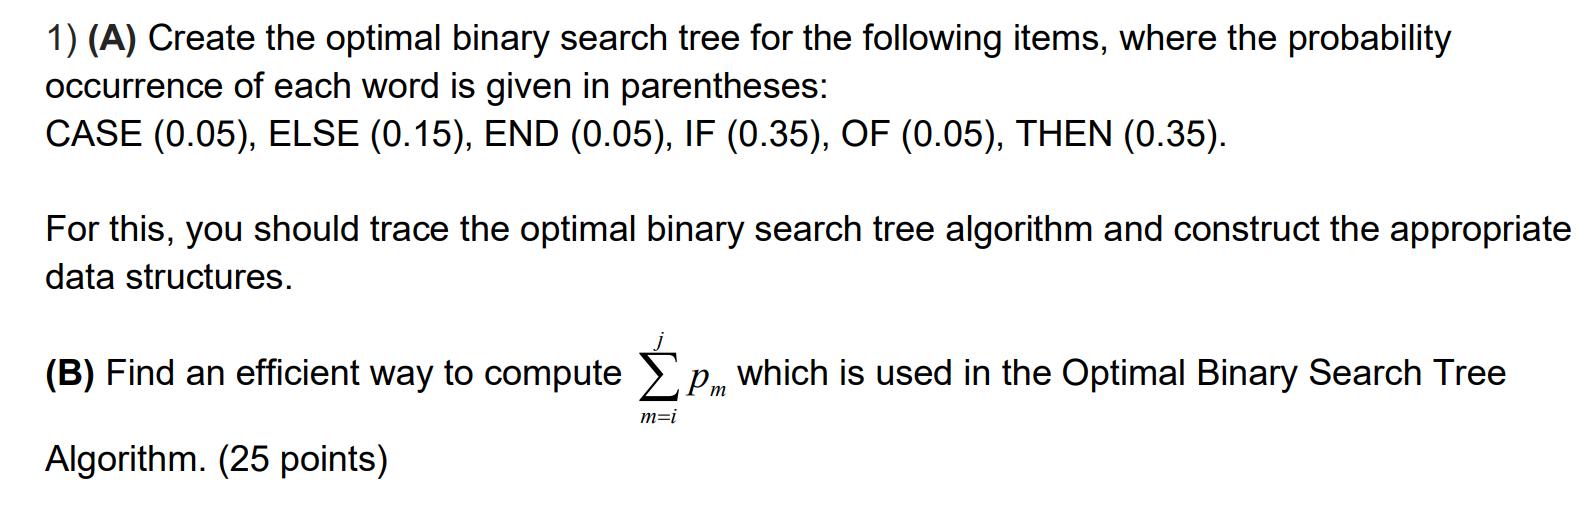 1) (A) Create the optimal binary search tree for the following items, where the probability occurrence of